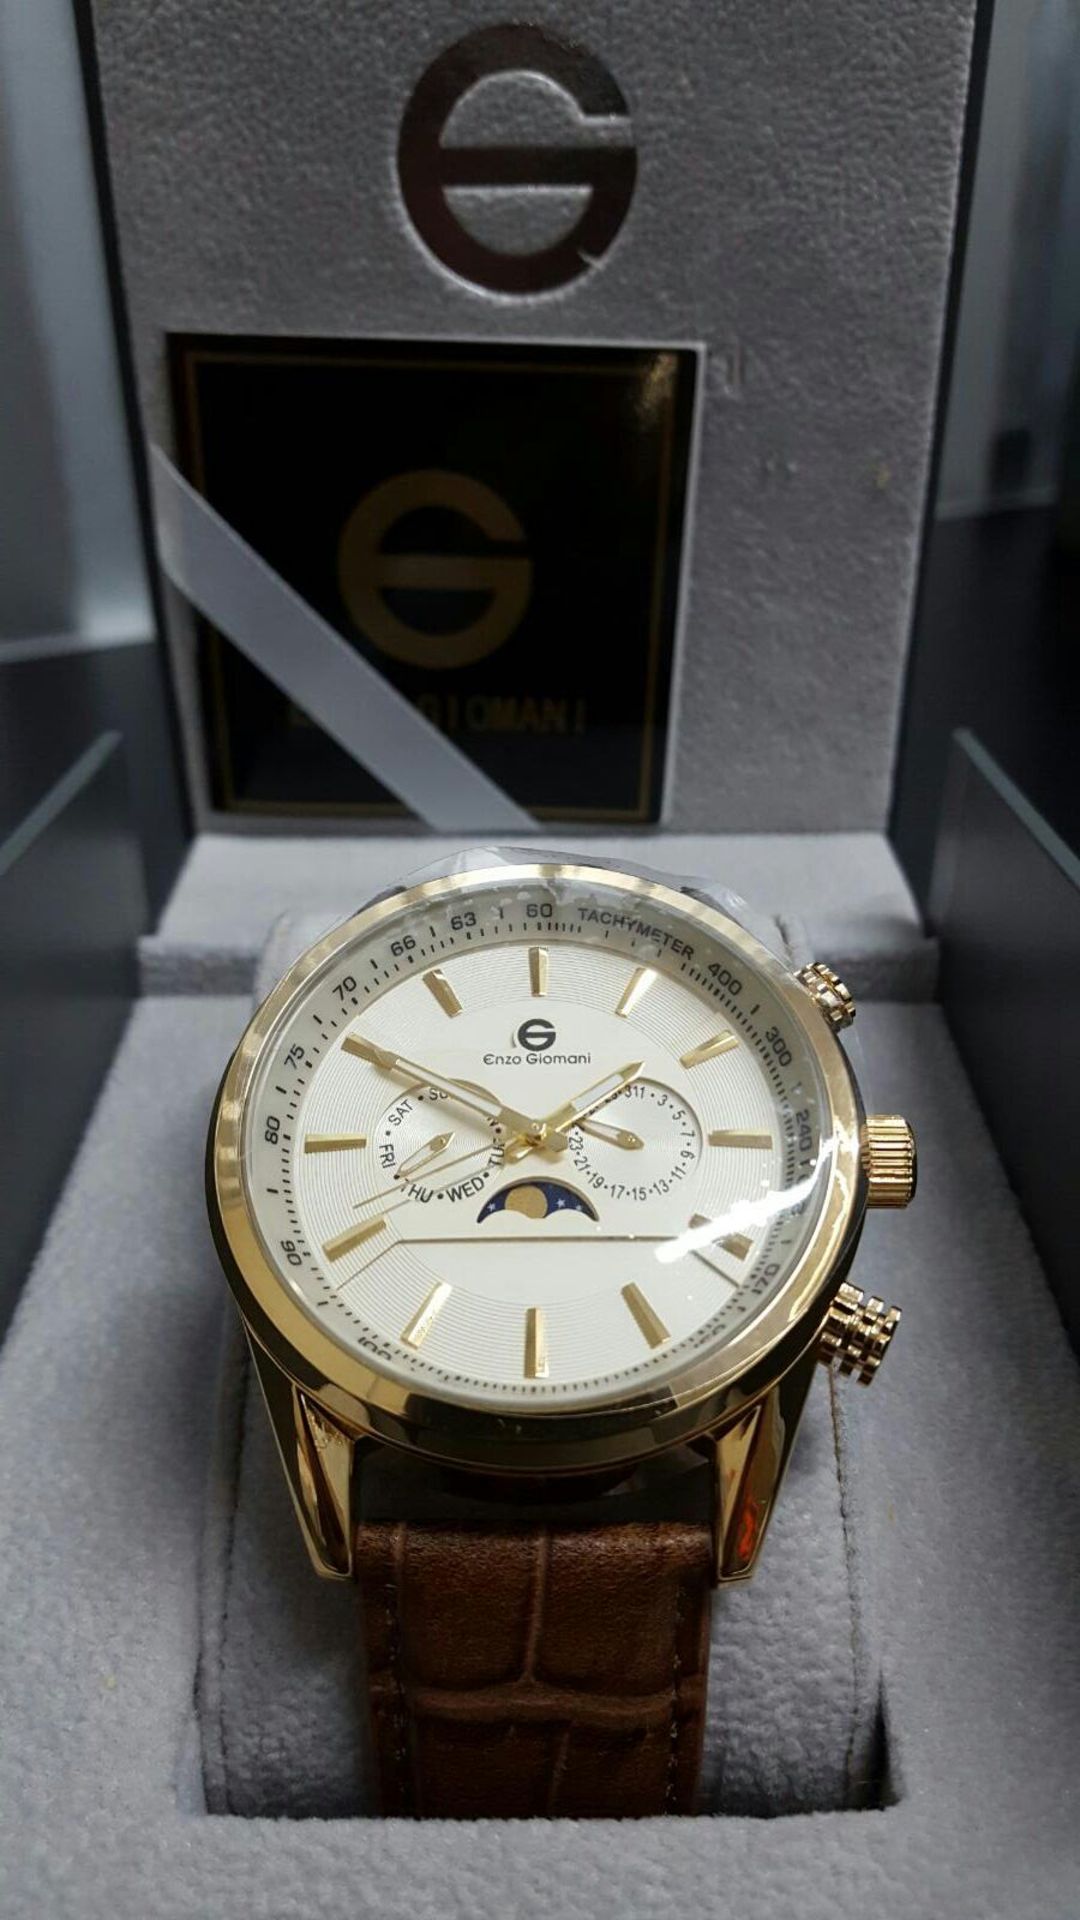 BRAND NEW ENZO GIOMANI EG0023, GENTS GOLD TONE WITH GOLD FACE WATCH, BROWN LEATHER STRAP, DAY/ - Image 2 of 2